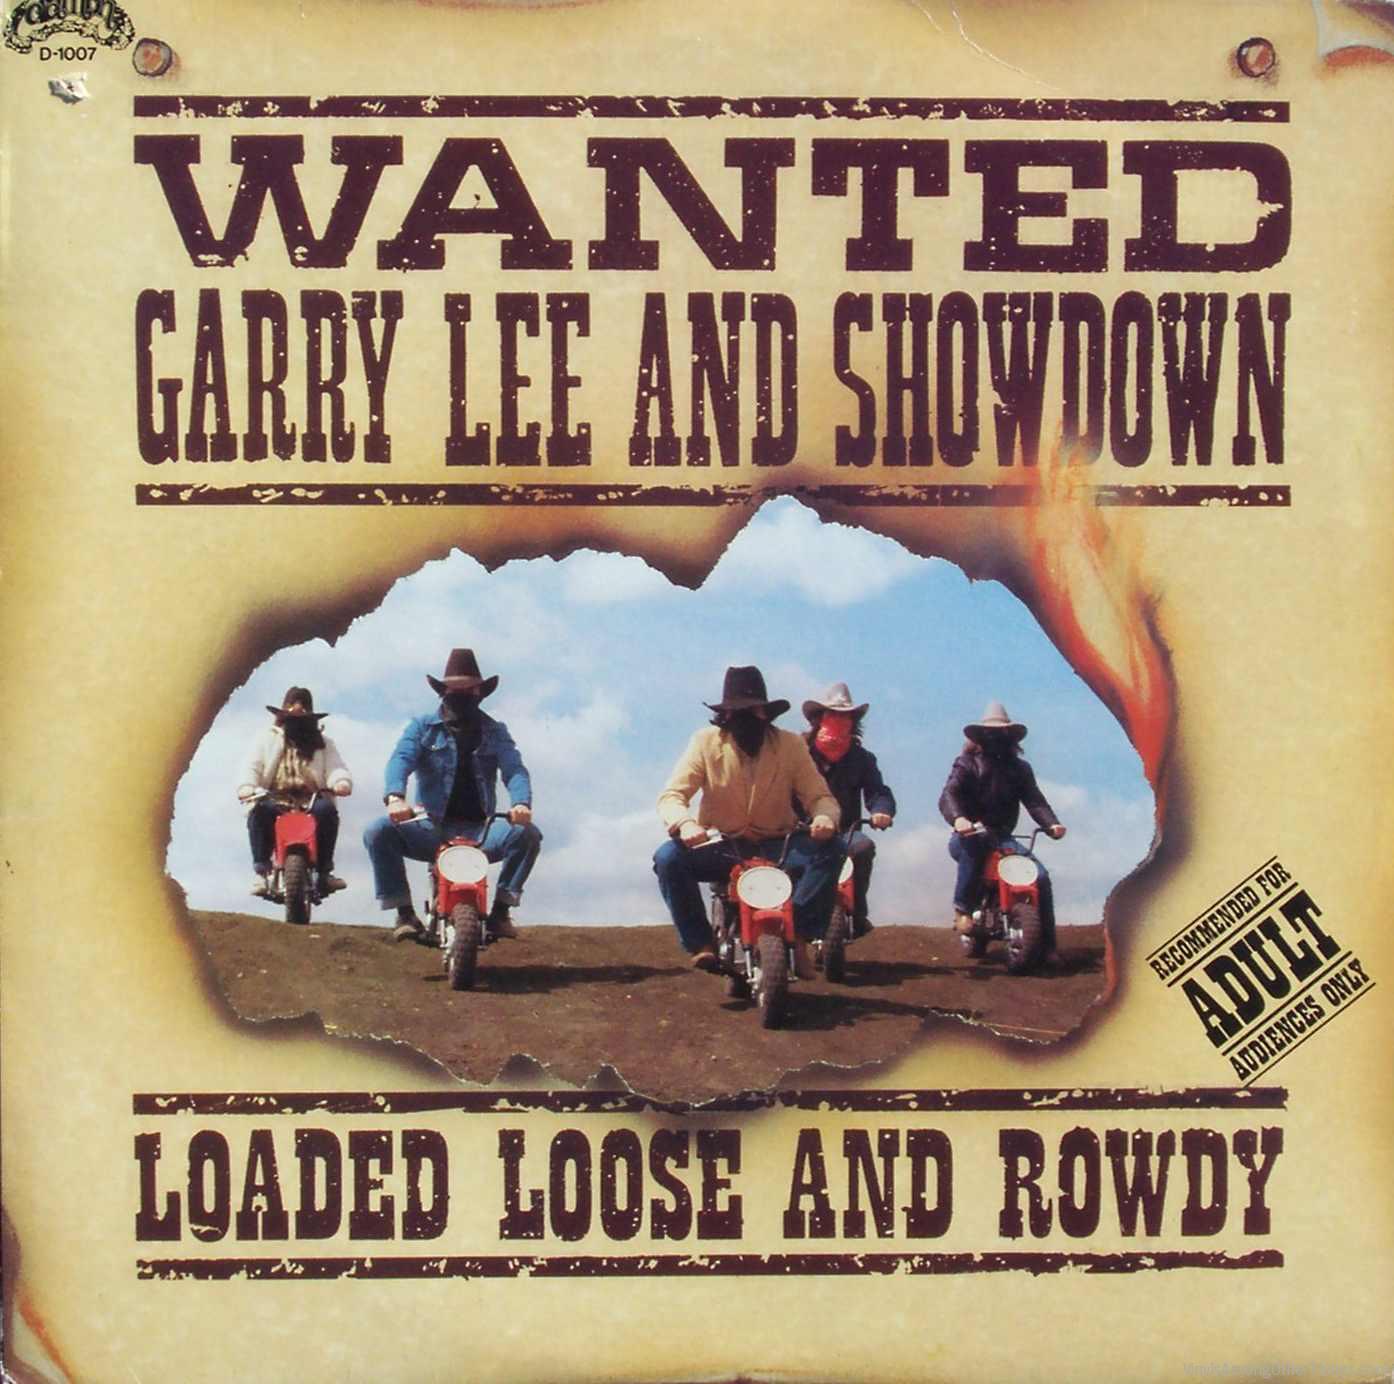 Garry Lee and Showdown – “Wanted! Garry Lee and Showdown: Loaded Loose and  Rowdy”